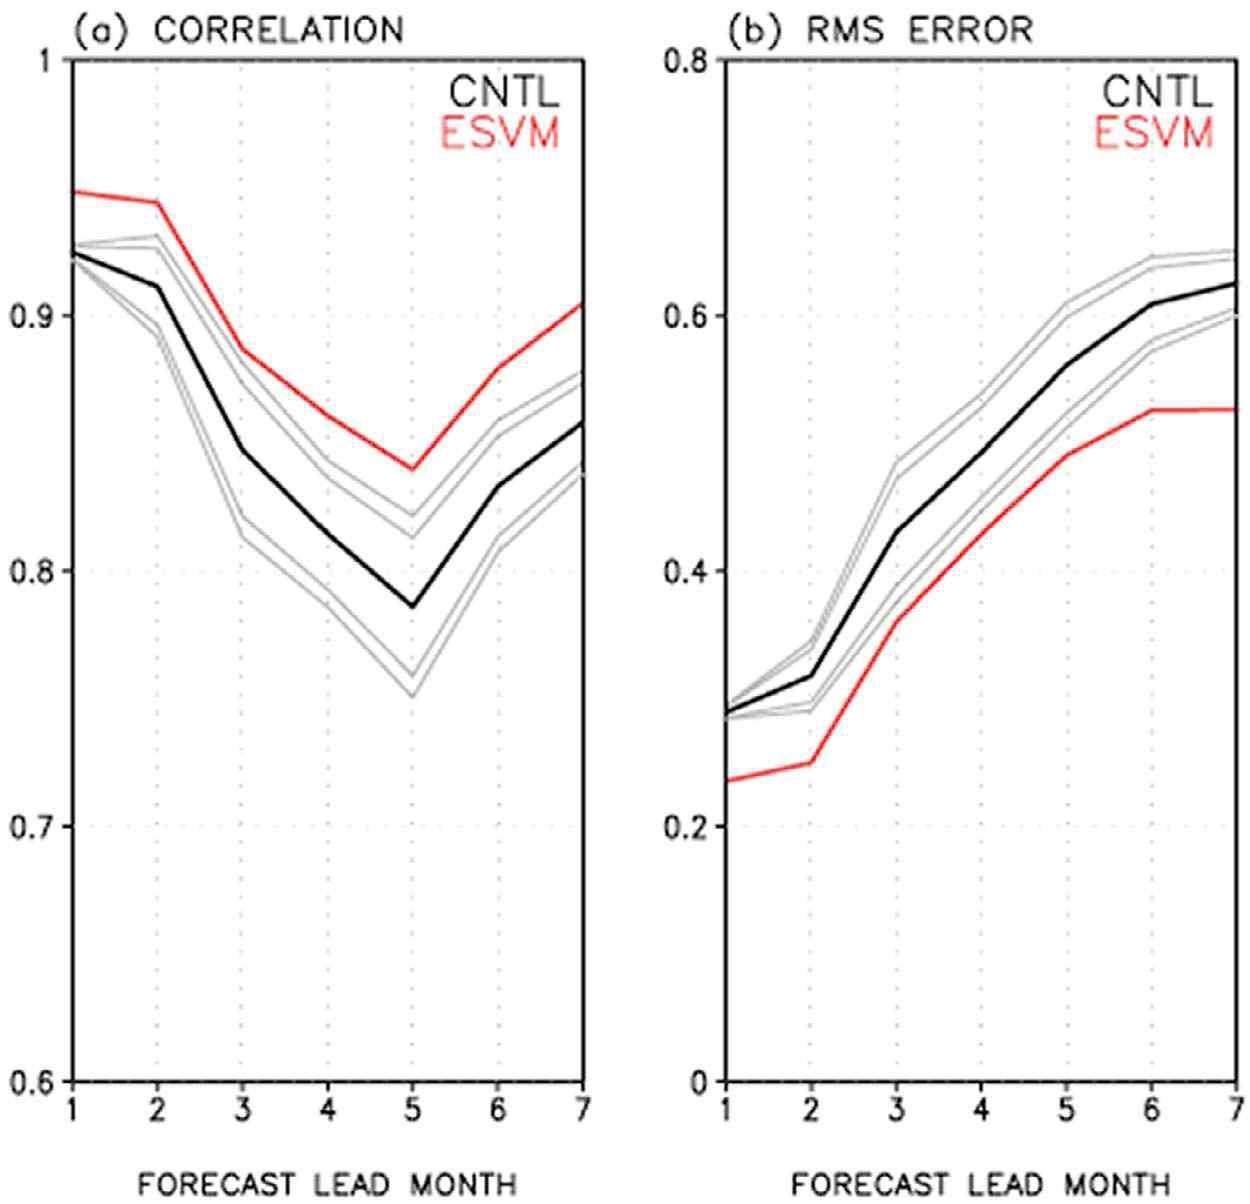 (a) Correlation and (b) RMS errors of NINO3 SST in CNTL (black) and ESVM (red).